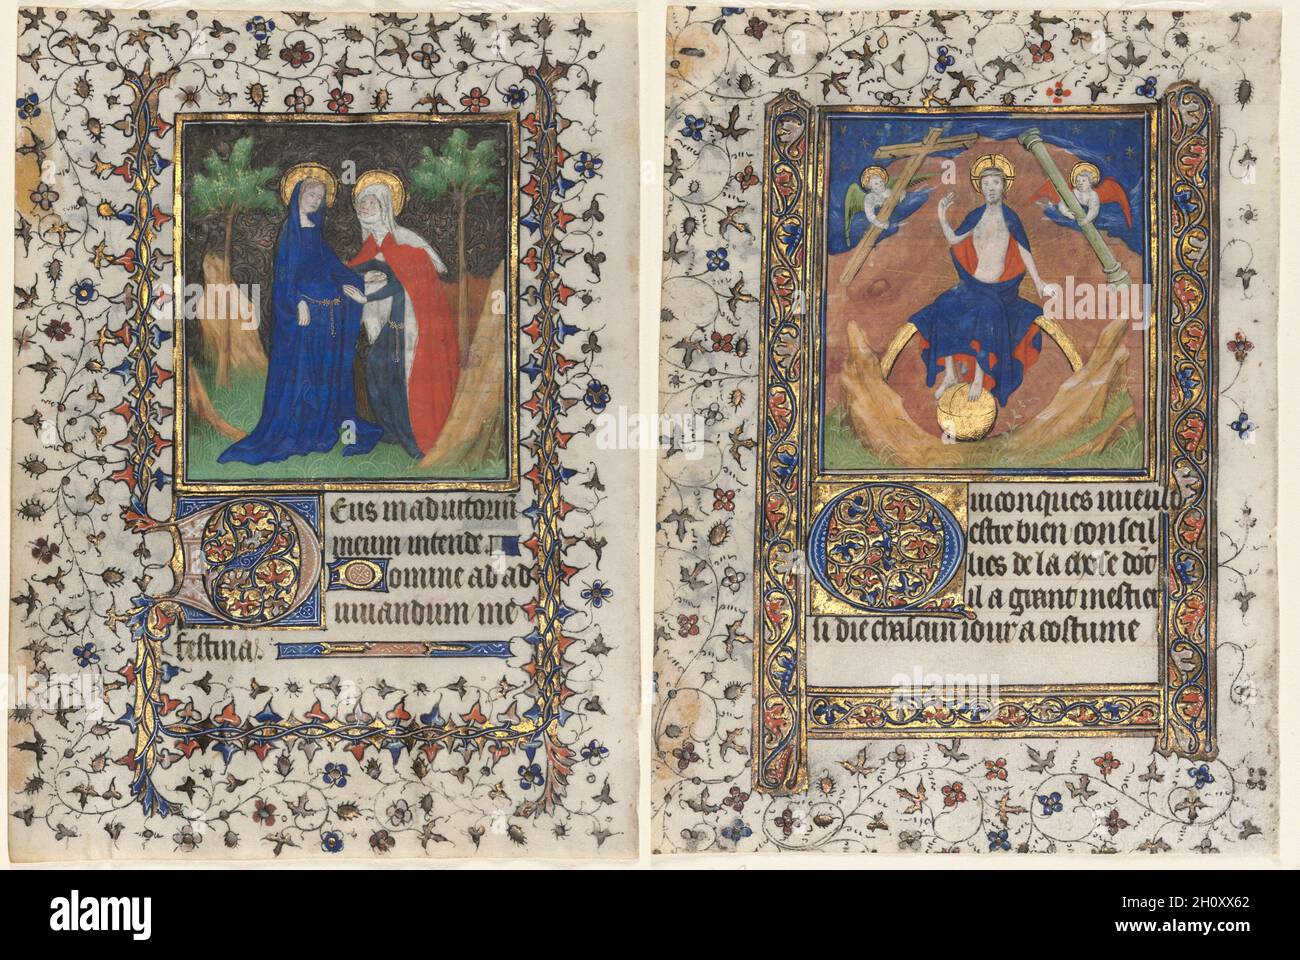 Leaves from a Book of Hours: The Visitation and Christ in Judgment, c. 1415. Workshop of Boucicaut Master (French, Paris, active about 1410-25). Ink, tempera, and gold on vellum; sheet: 17 x 12.7 cm (6 11/16 x 5 in.). Stock Photo